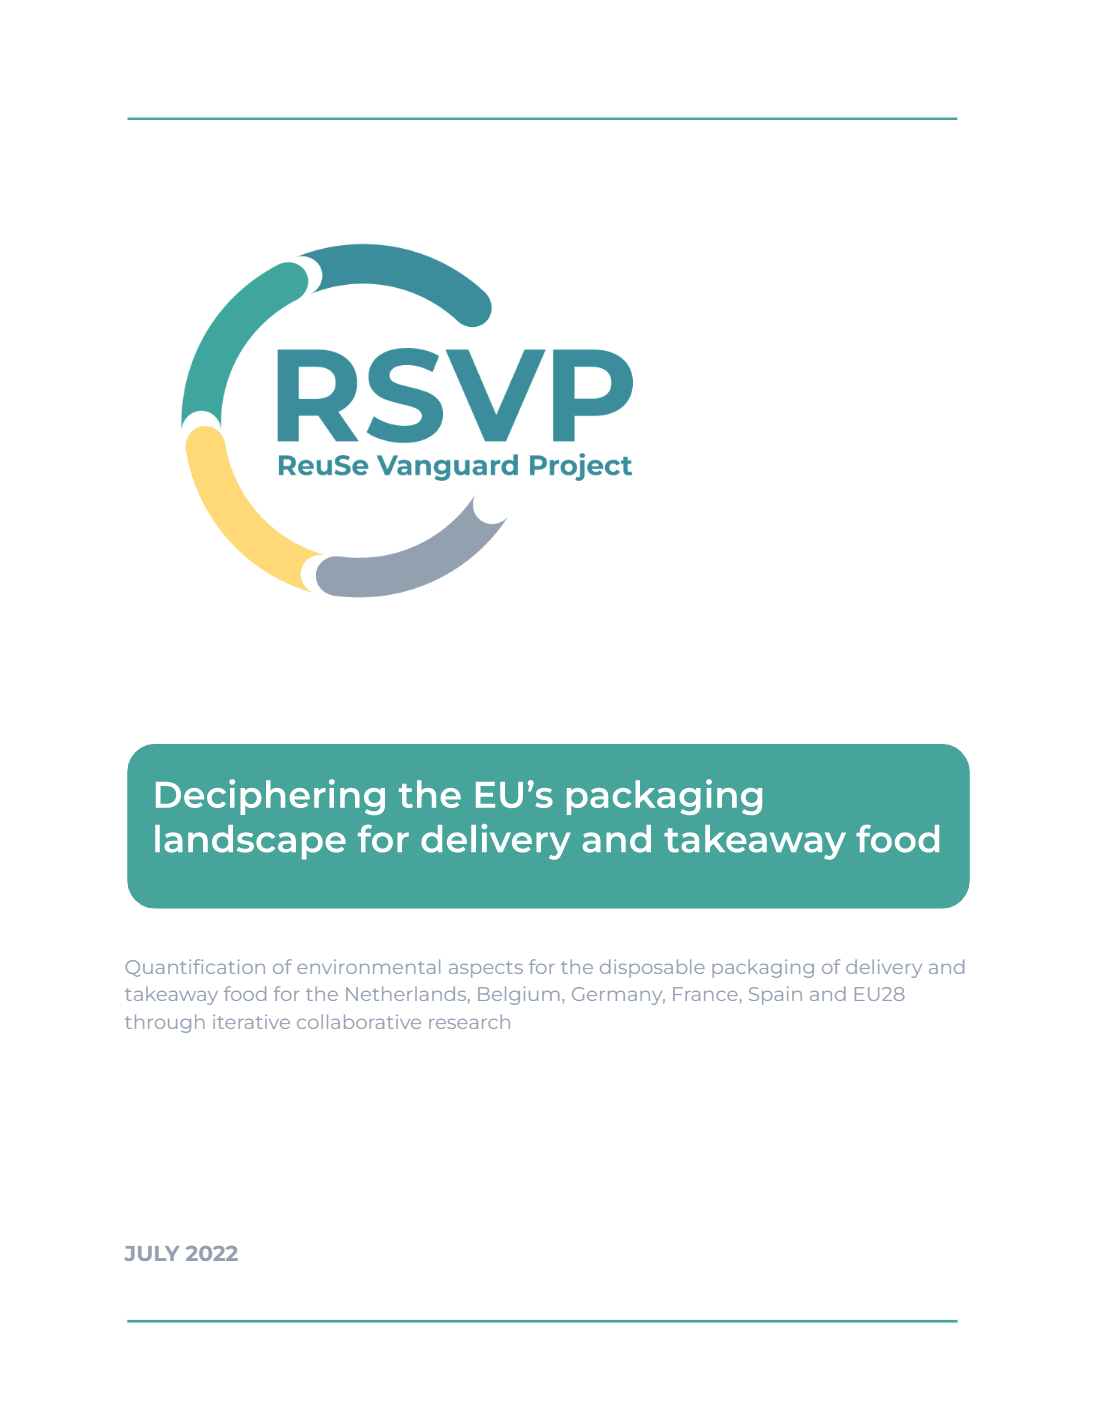 Deciphering the EU’s packaging landscape for delivery and takeaway food